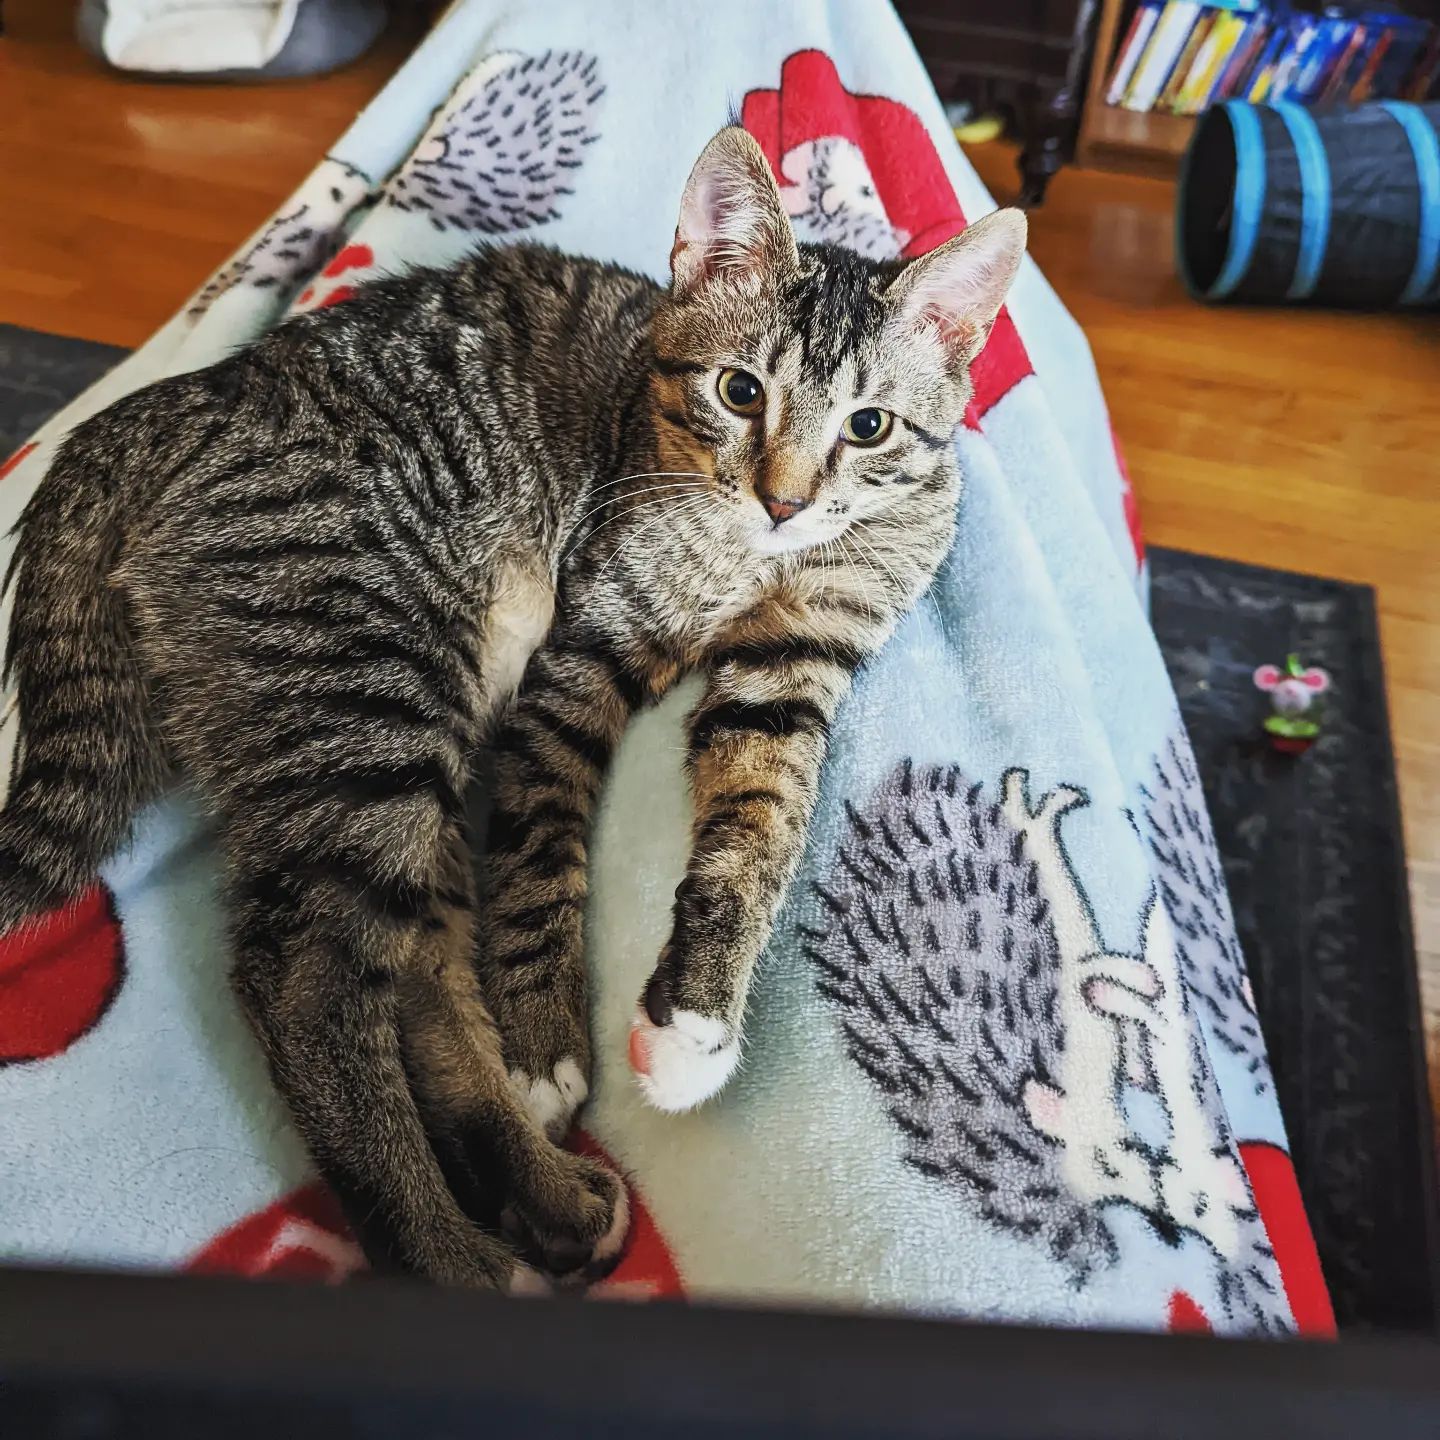 Working from home today, so I put my furry legwarmers on. Well, legwarmer, and he kind of put himself there.

#cat #kitten